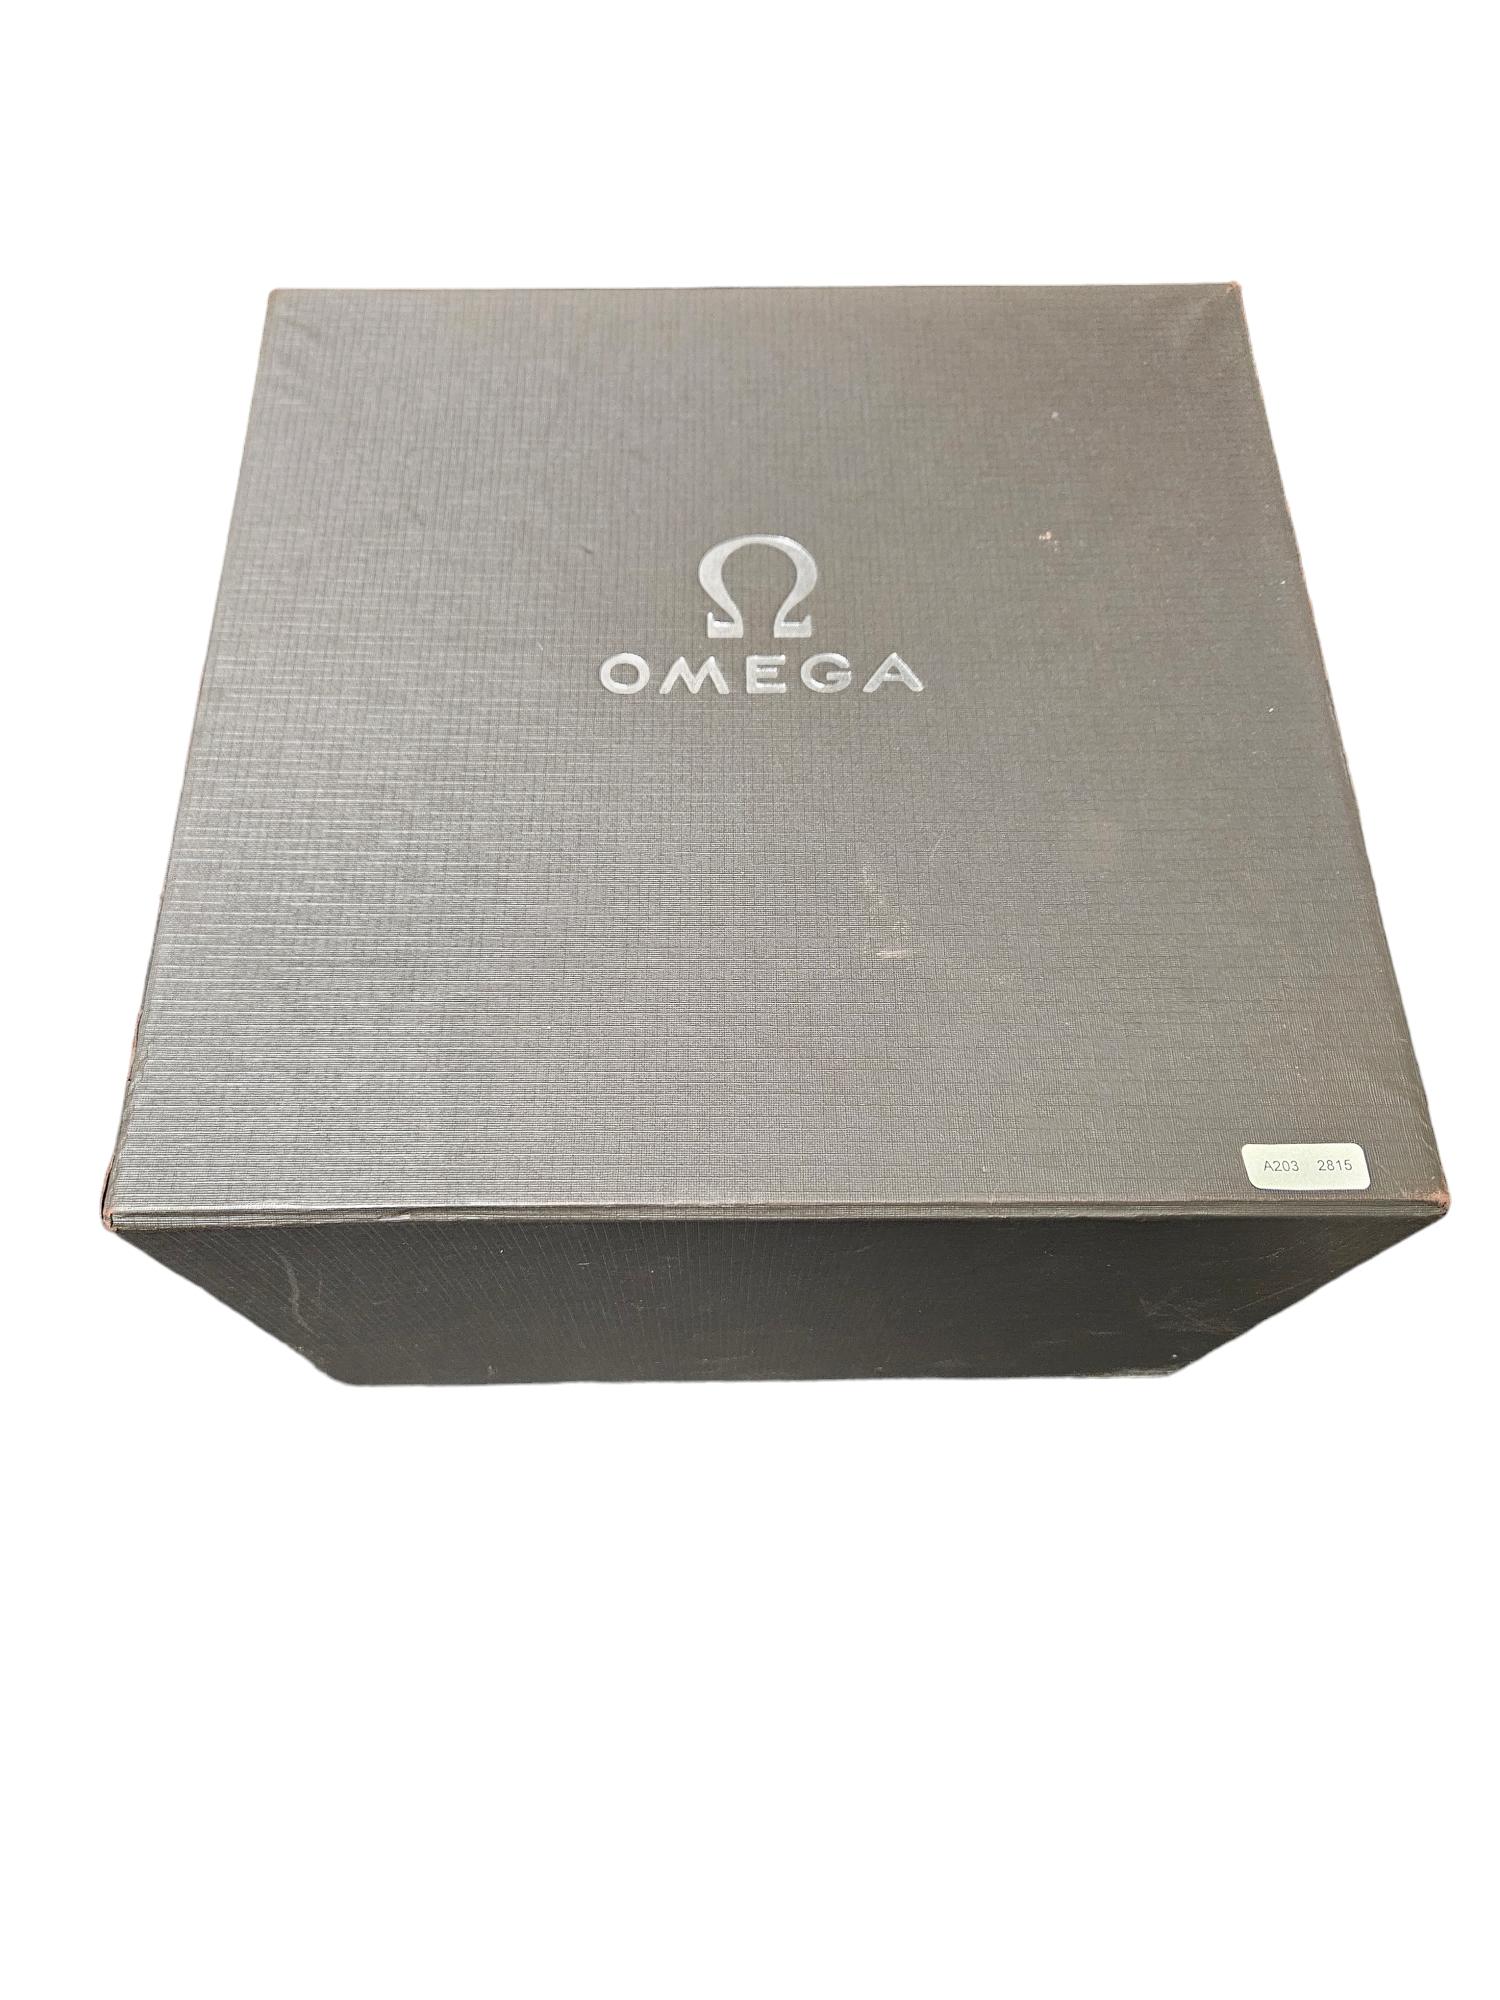 Omega Speedmaster 50th Anniversary Limited Edition Co Axial Chronograph Watch For Sale 11